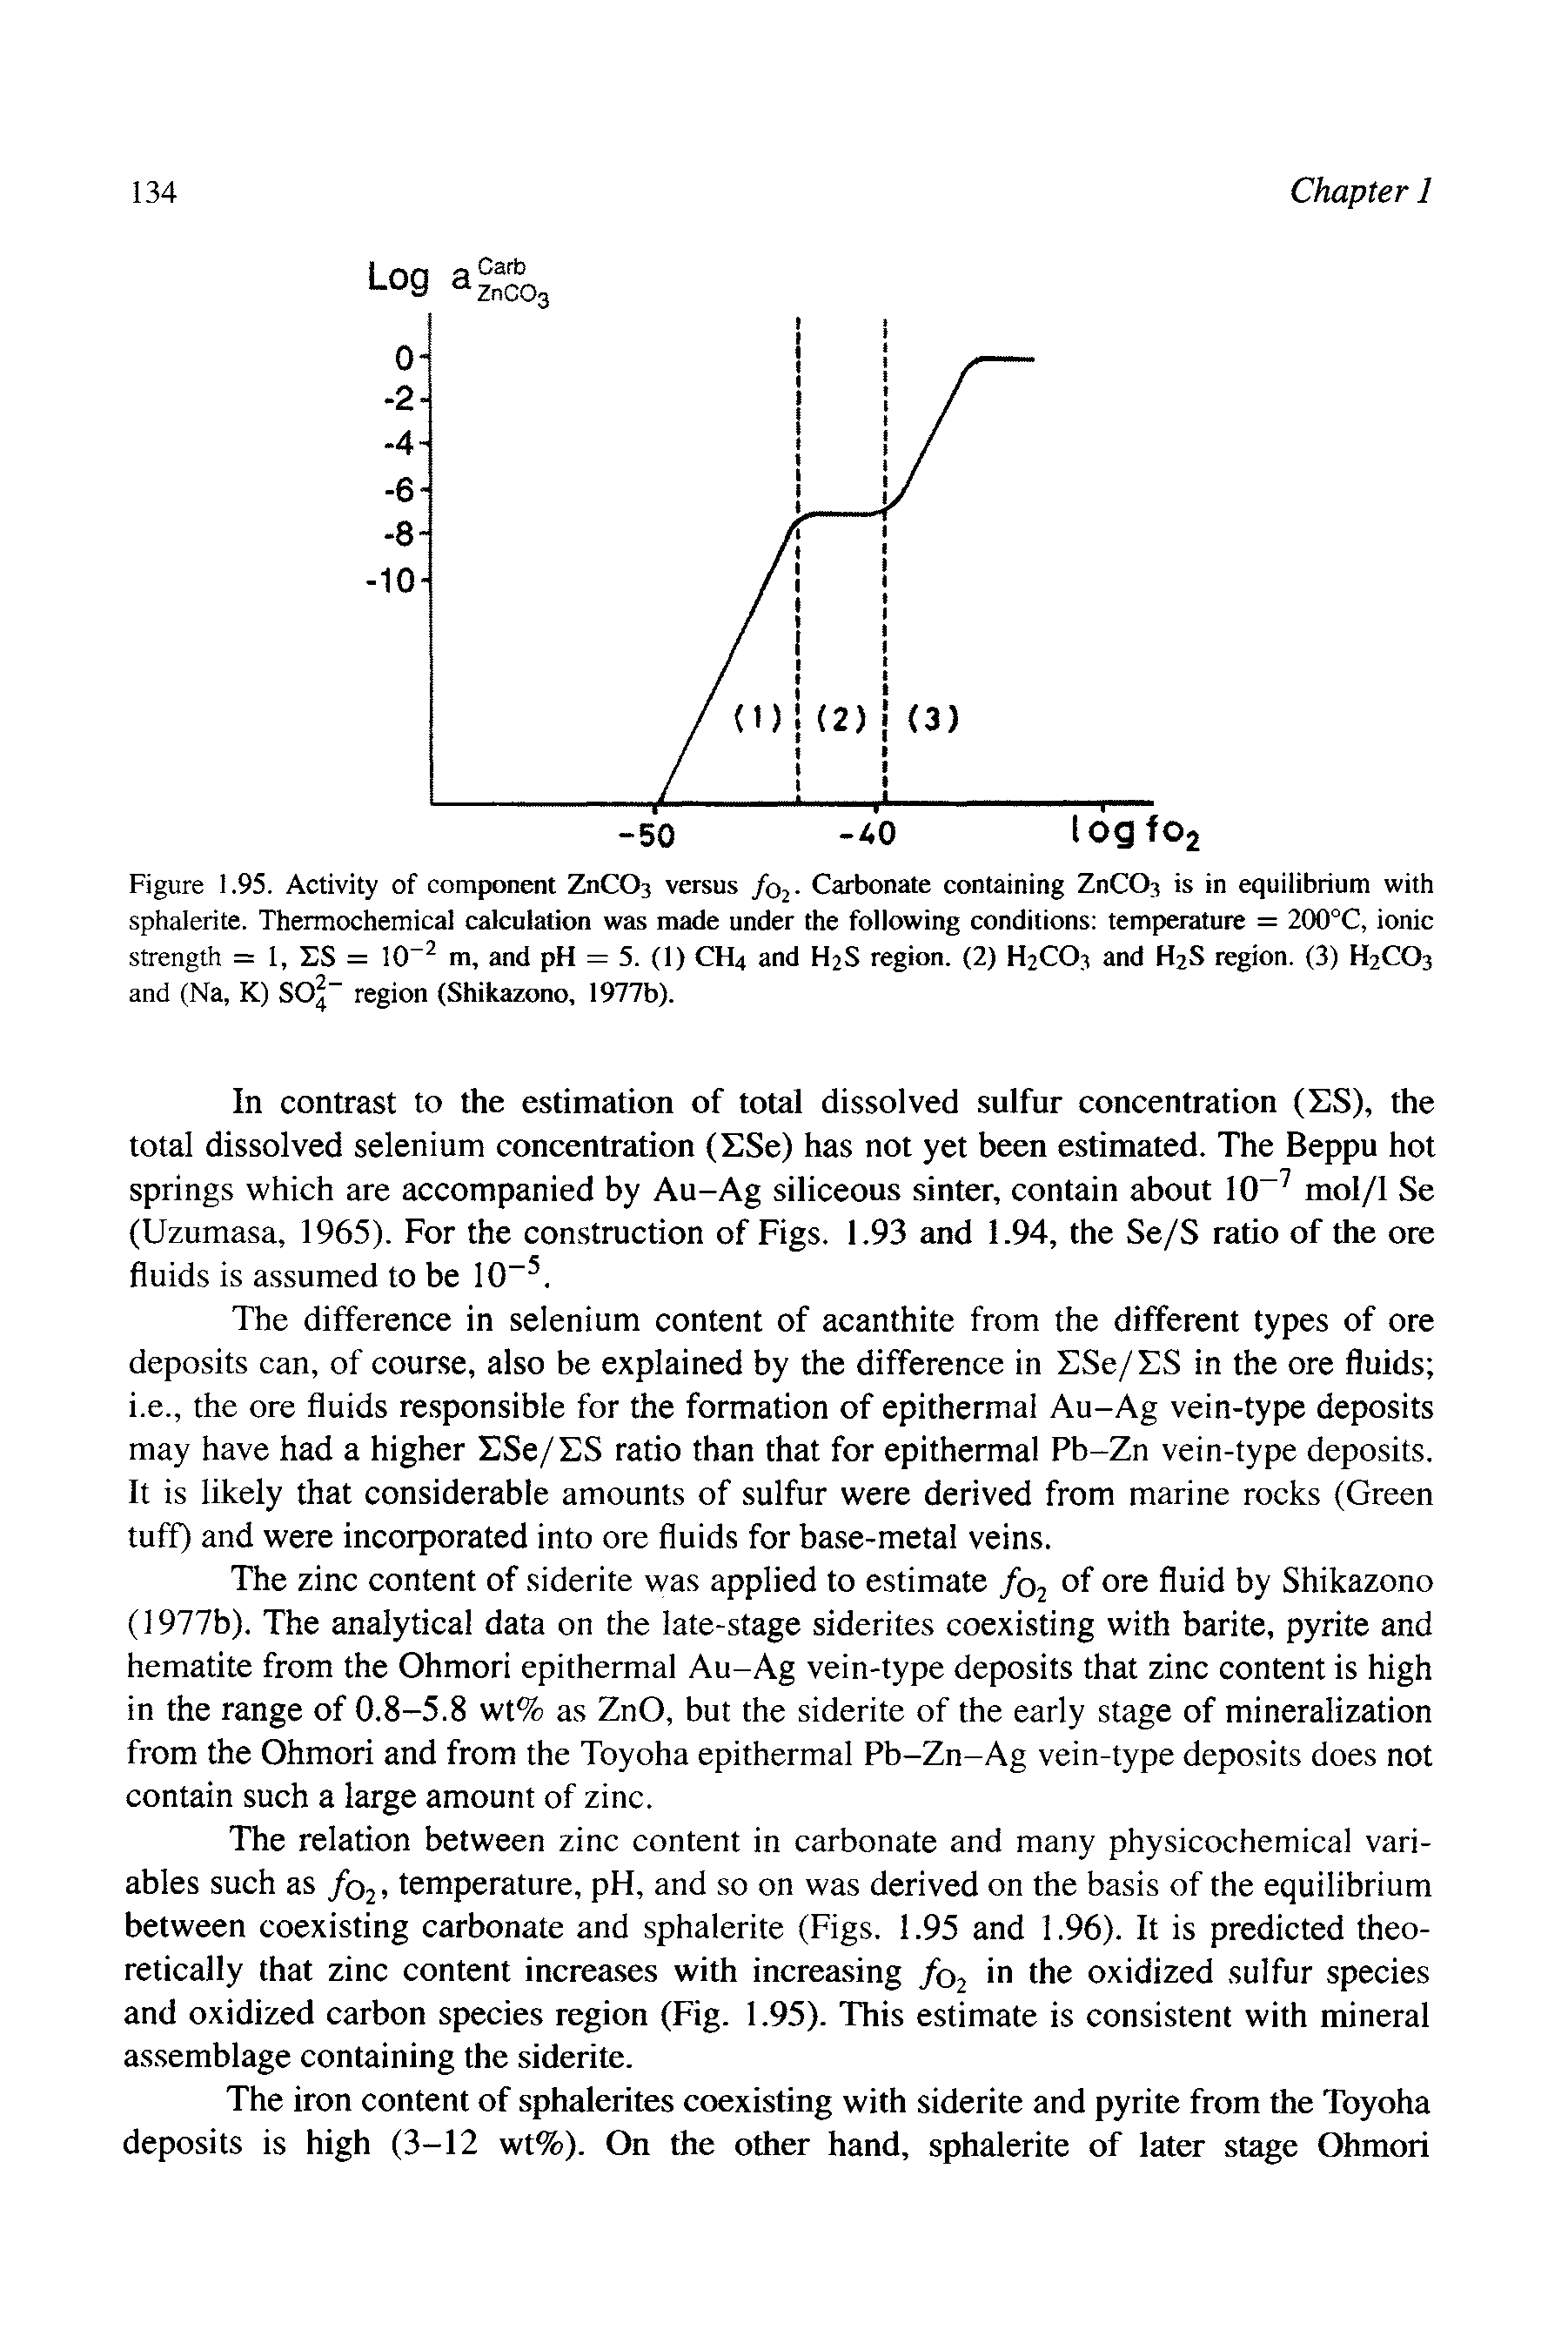 Figure 1.95. Activity of component ZnCOs versus /oj. Carbonate containing ZnCOs is in equilibrium with sphalerite. Thermochemical calculation was made under the following conditions temperature = 200°C, ionic strength = 1, ES = 10 m, and pH = 5. (1) CH4 and H2S region. (2) H2CO3 and H2S region. (3) H2CO3 and (Na, K) SOj region (Shikazono, 1977b).